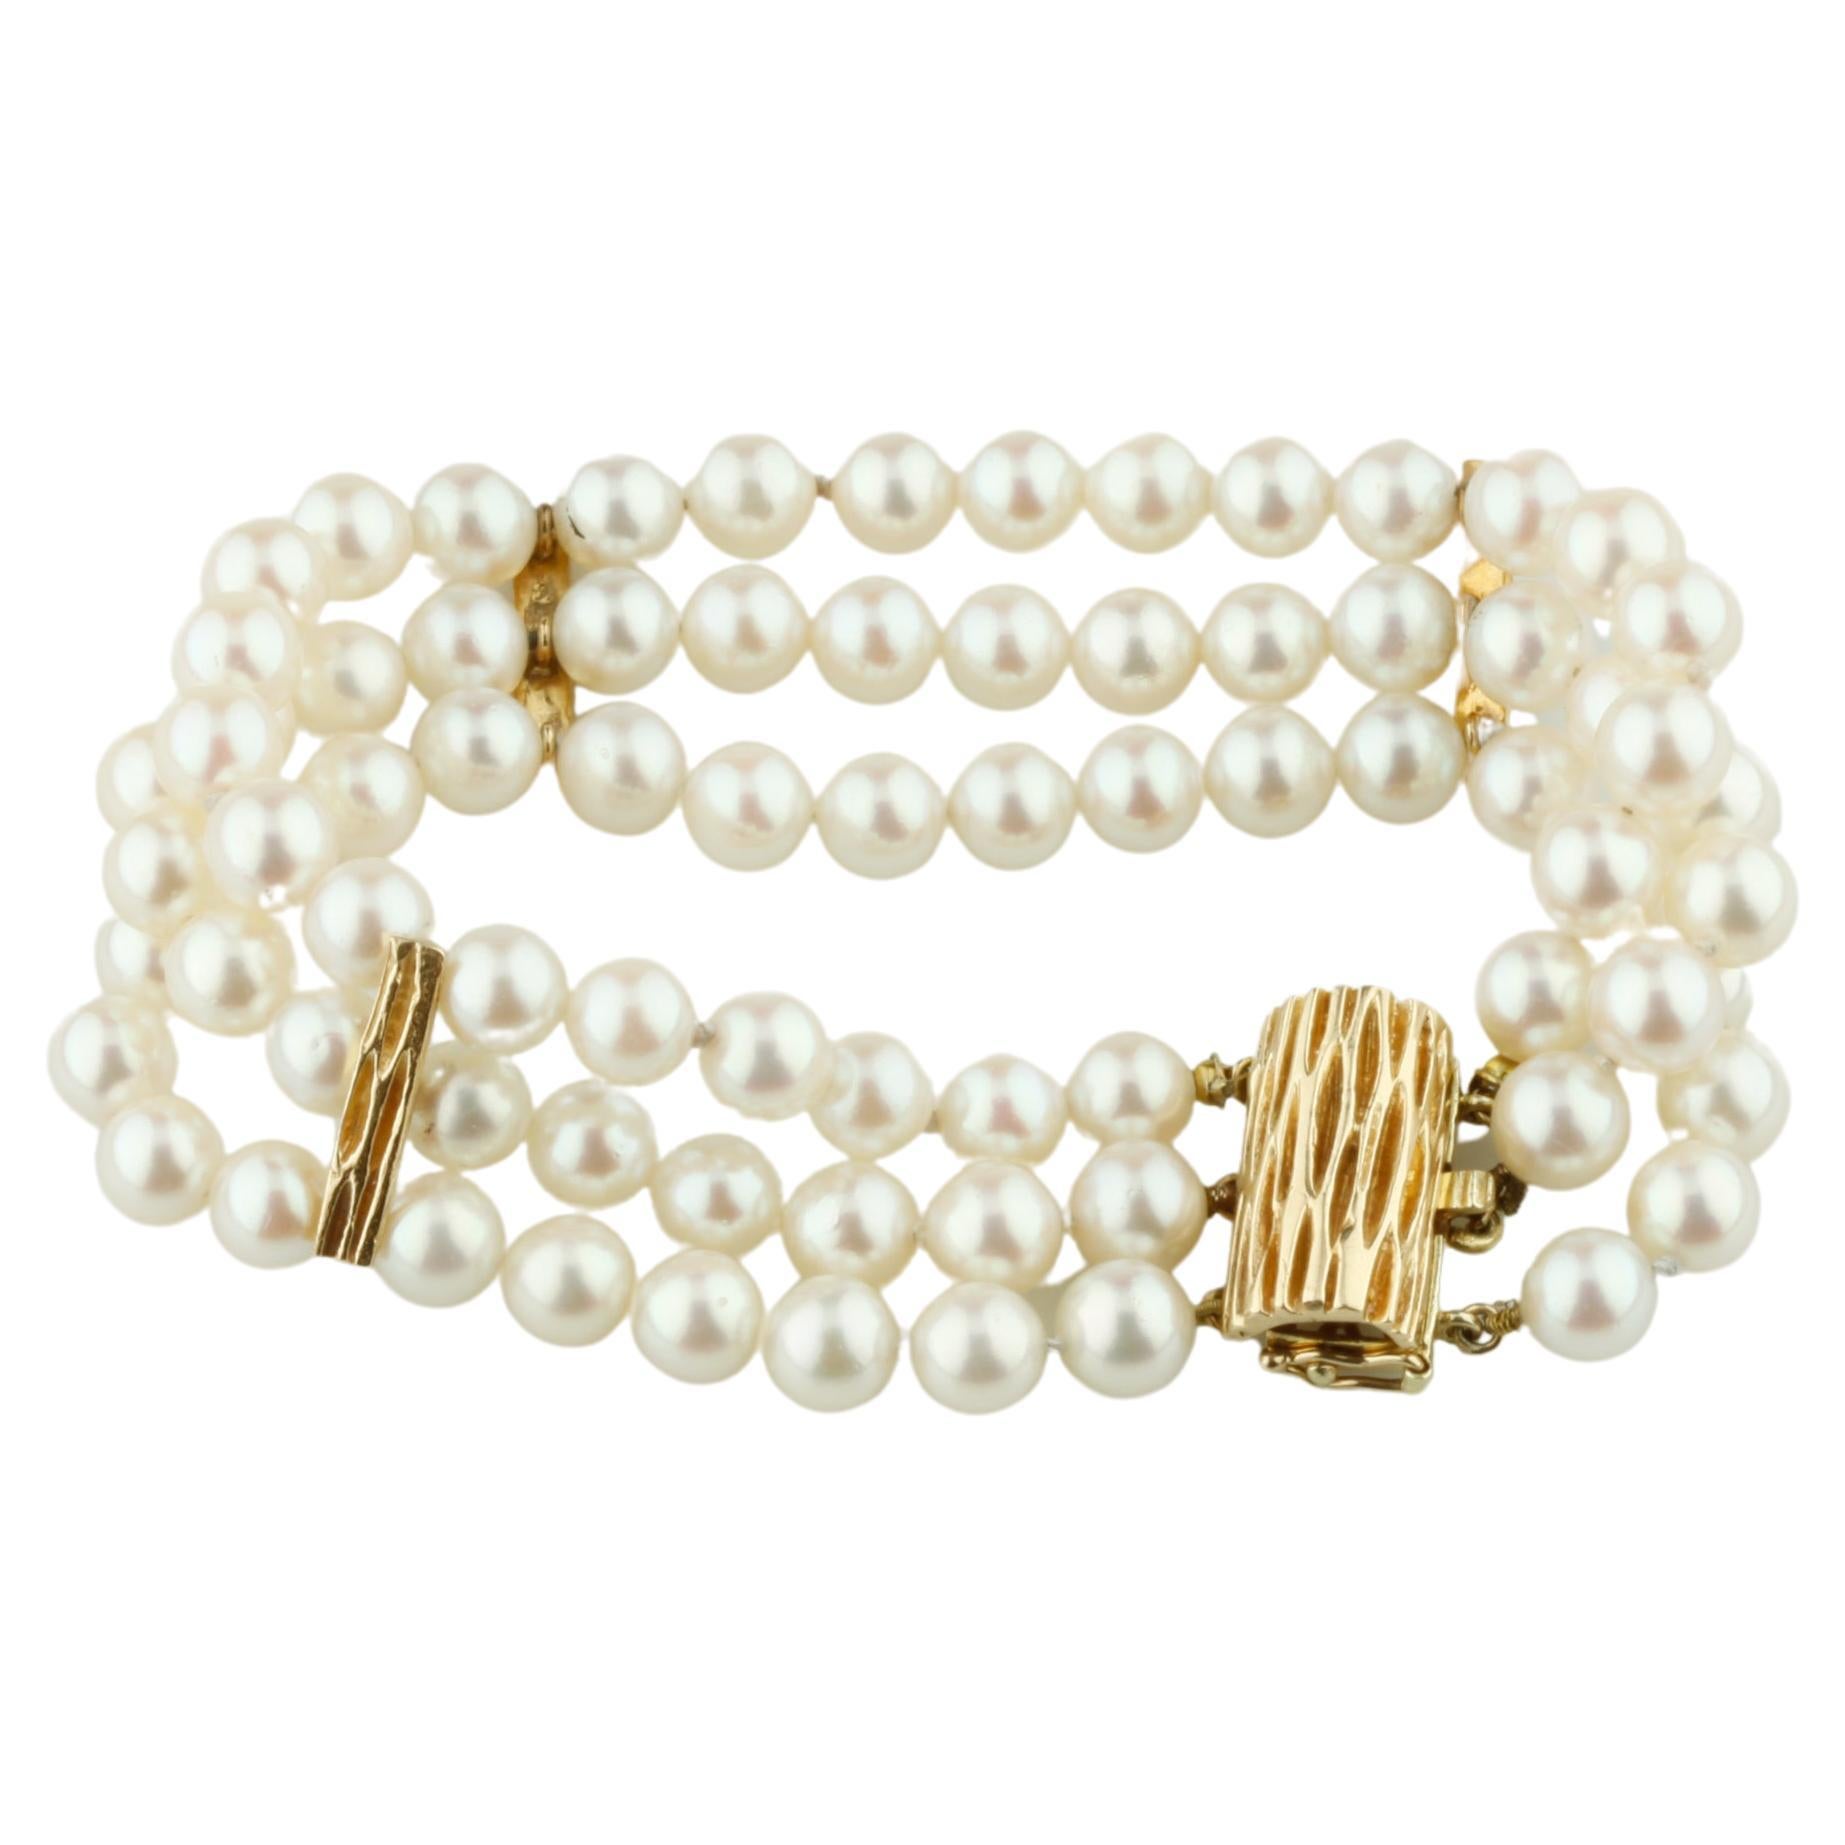 14k Yellow Gold Three-Strand Pearl Bracelet w/ Gold Accents